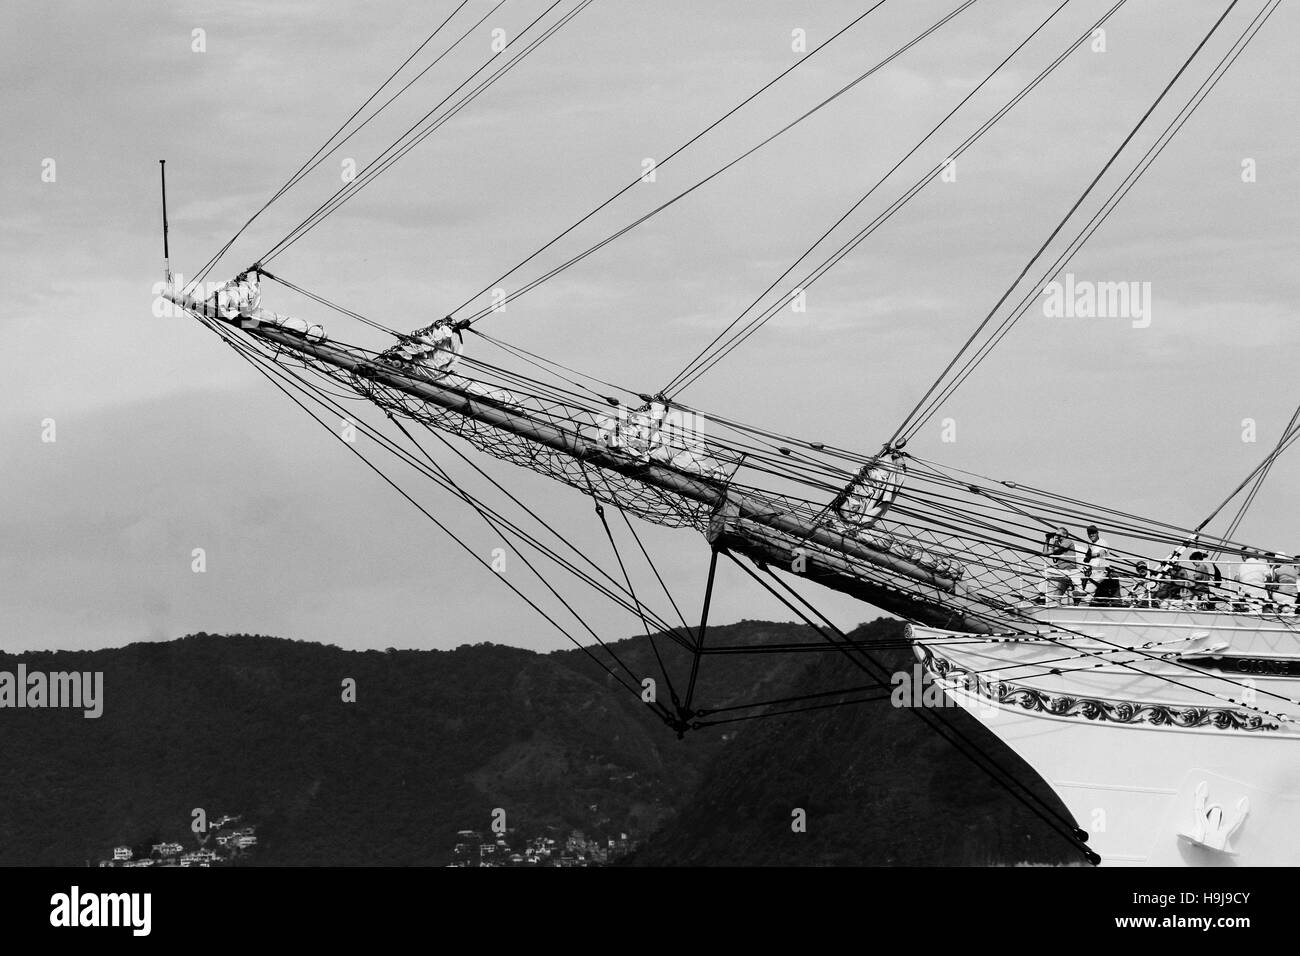 Bowsprit of the Brazilian Navy's three masted cutter Stock Photo